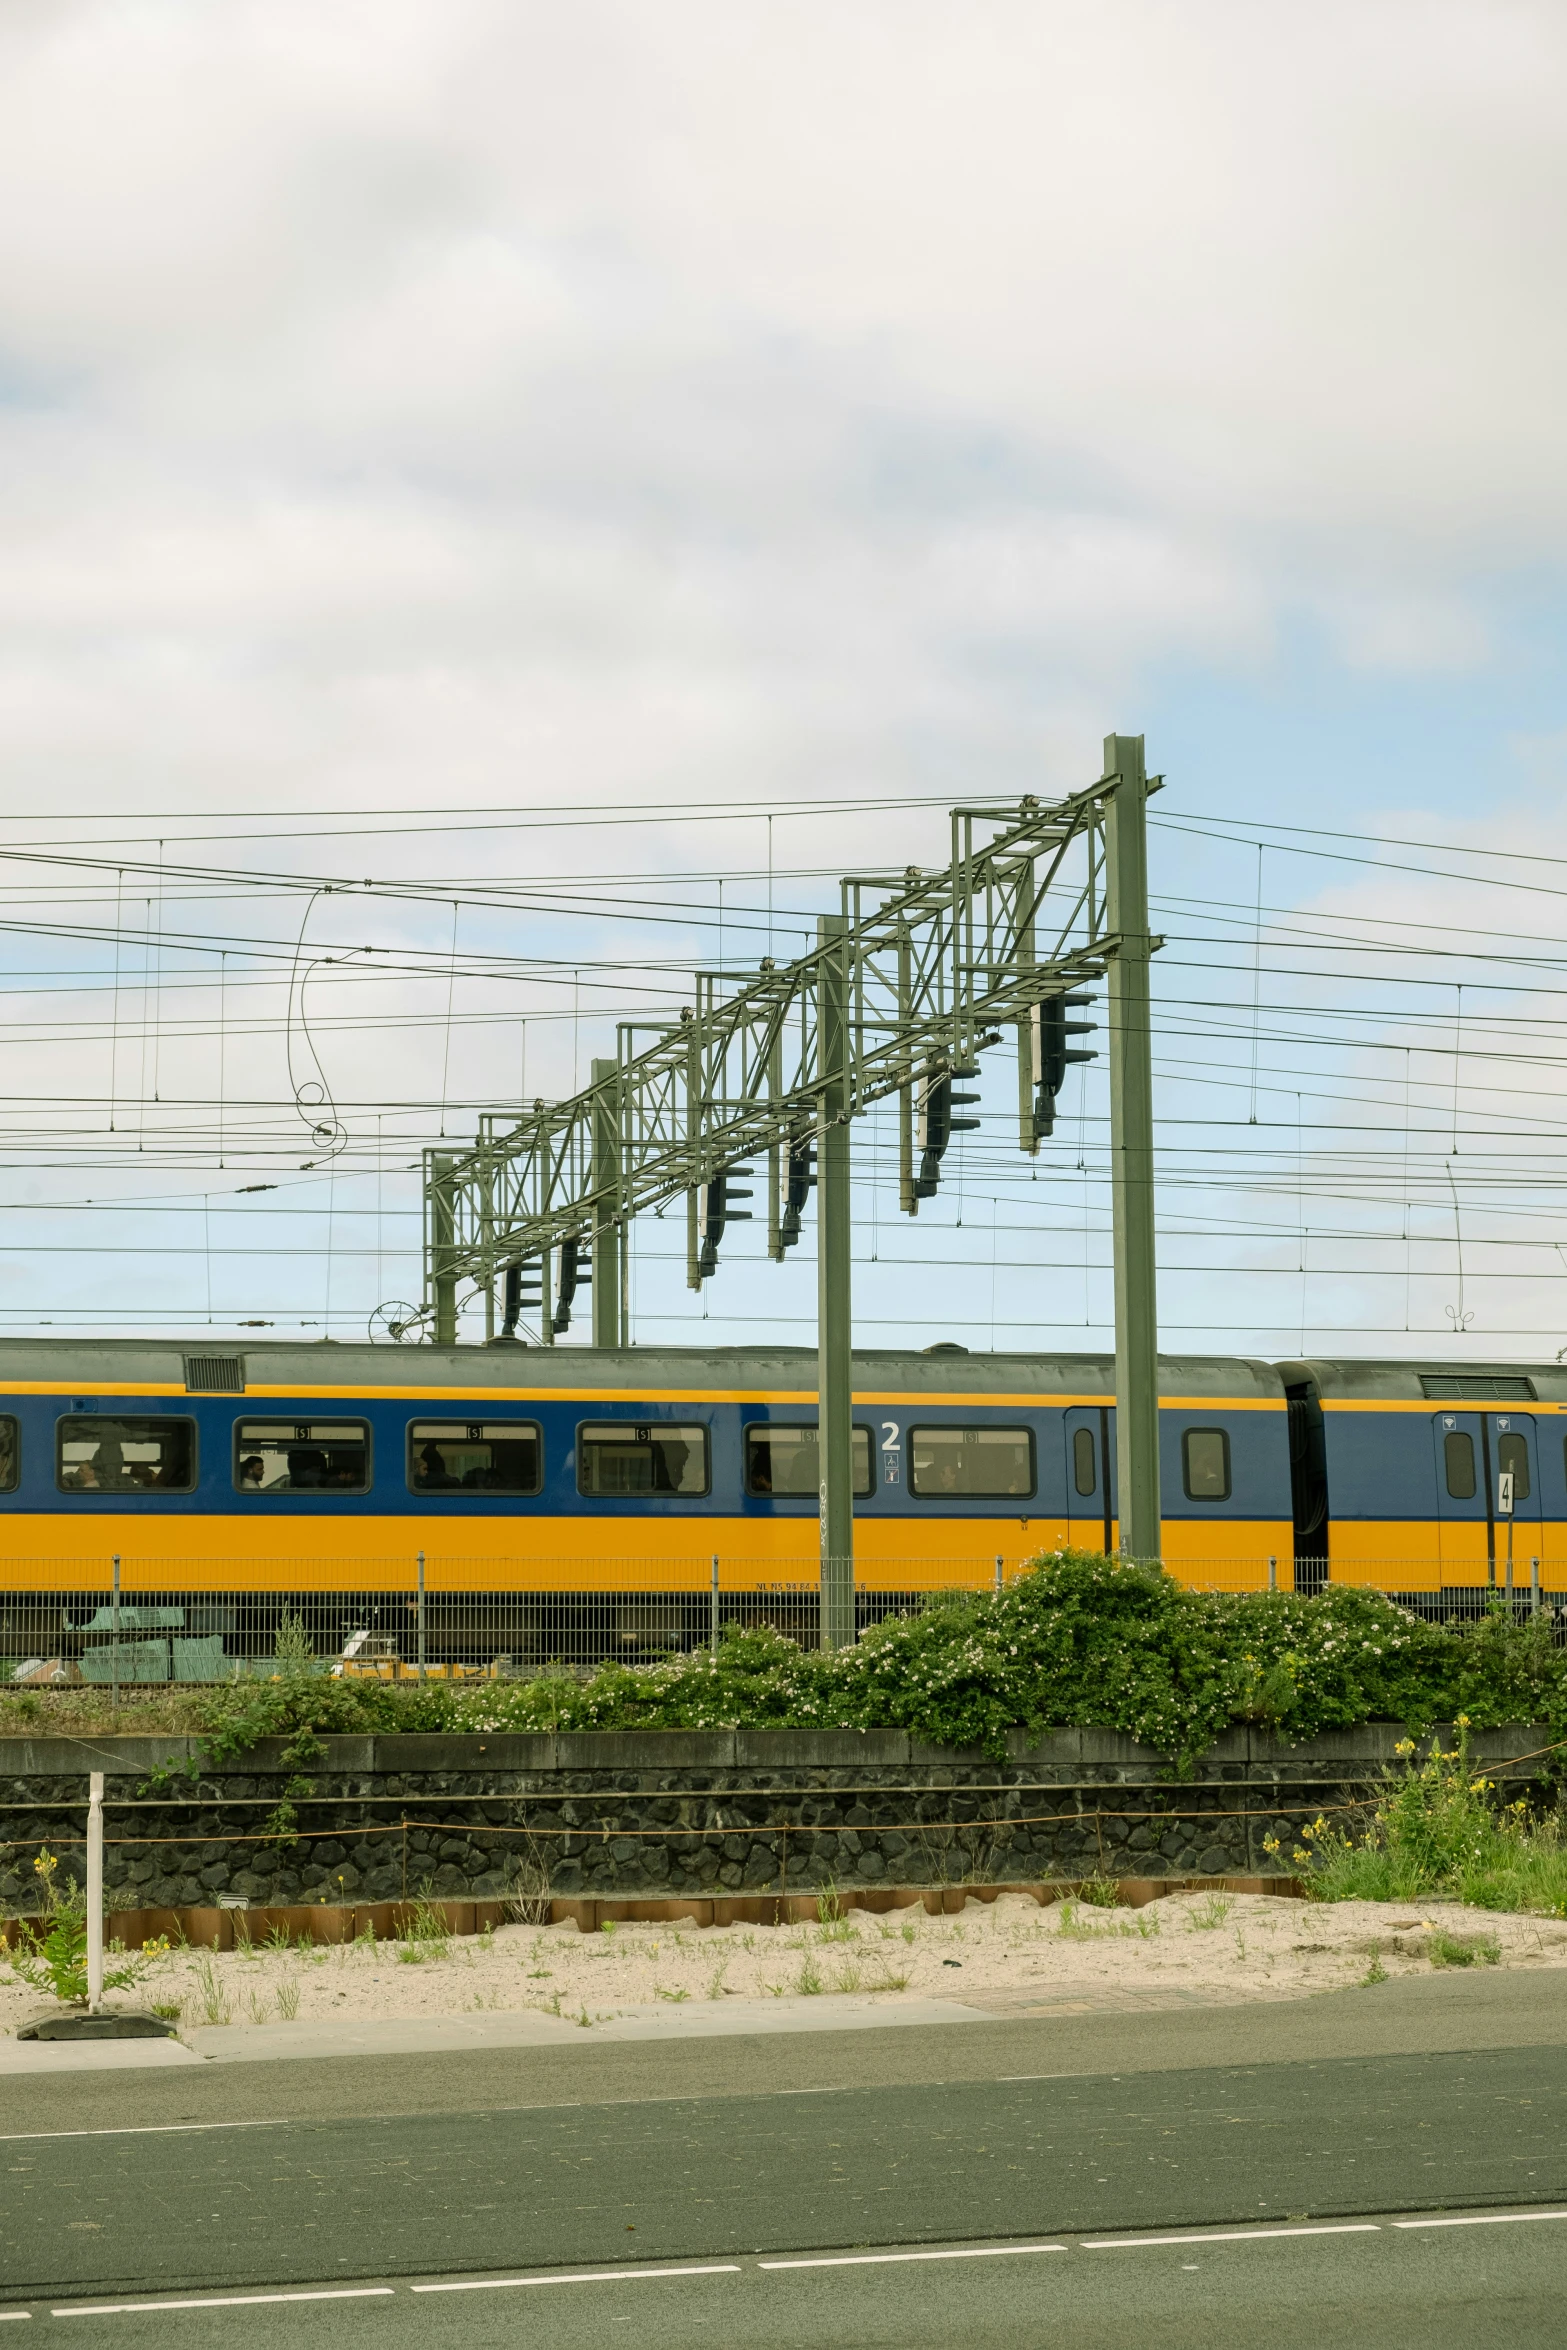 a train traveling down tracks under power lines